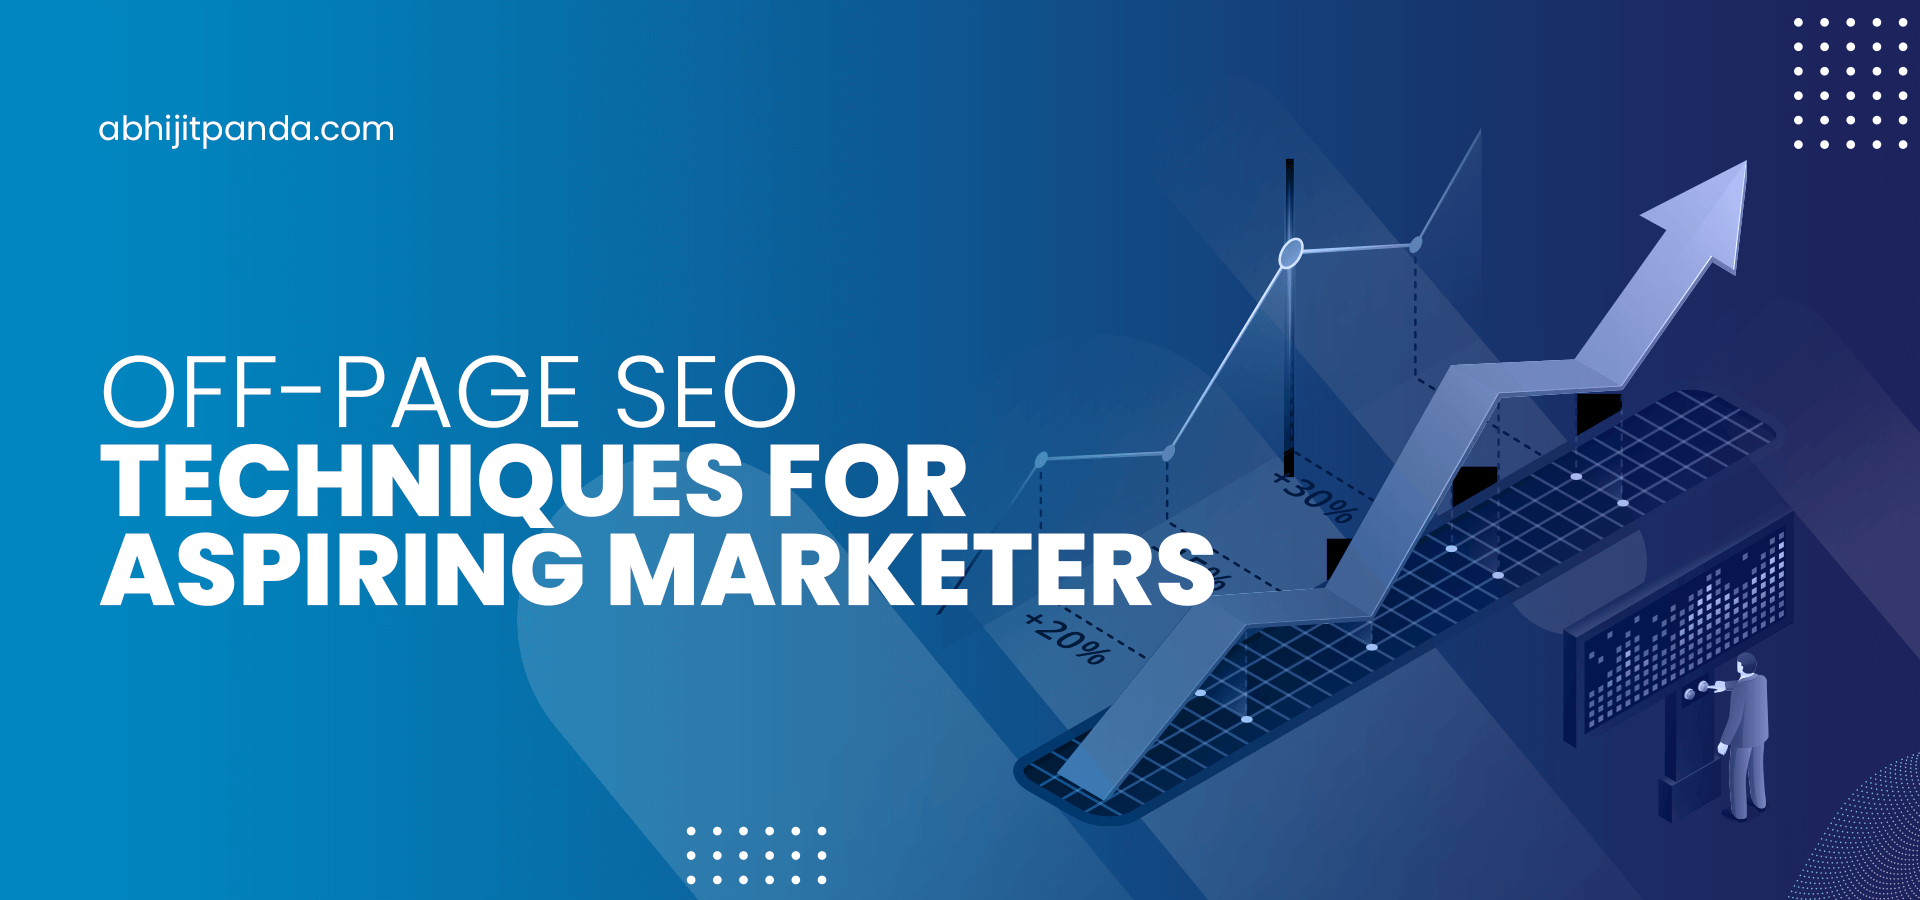 Off-Page SEO Techniques for Aspiring Marketers